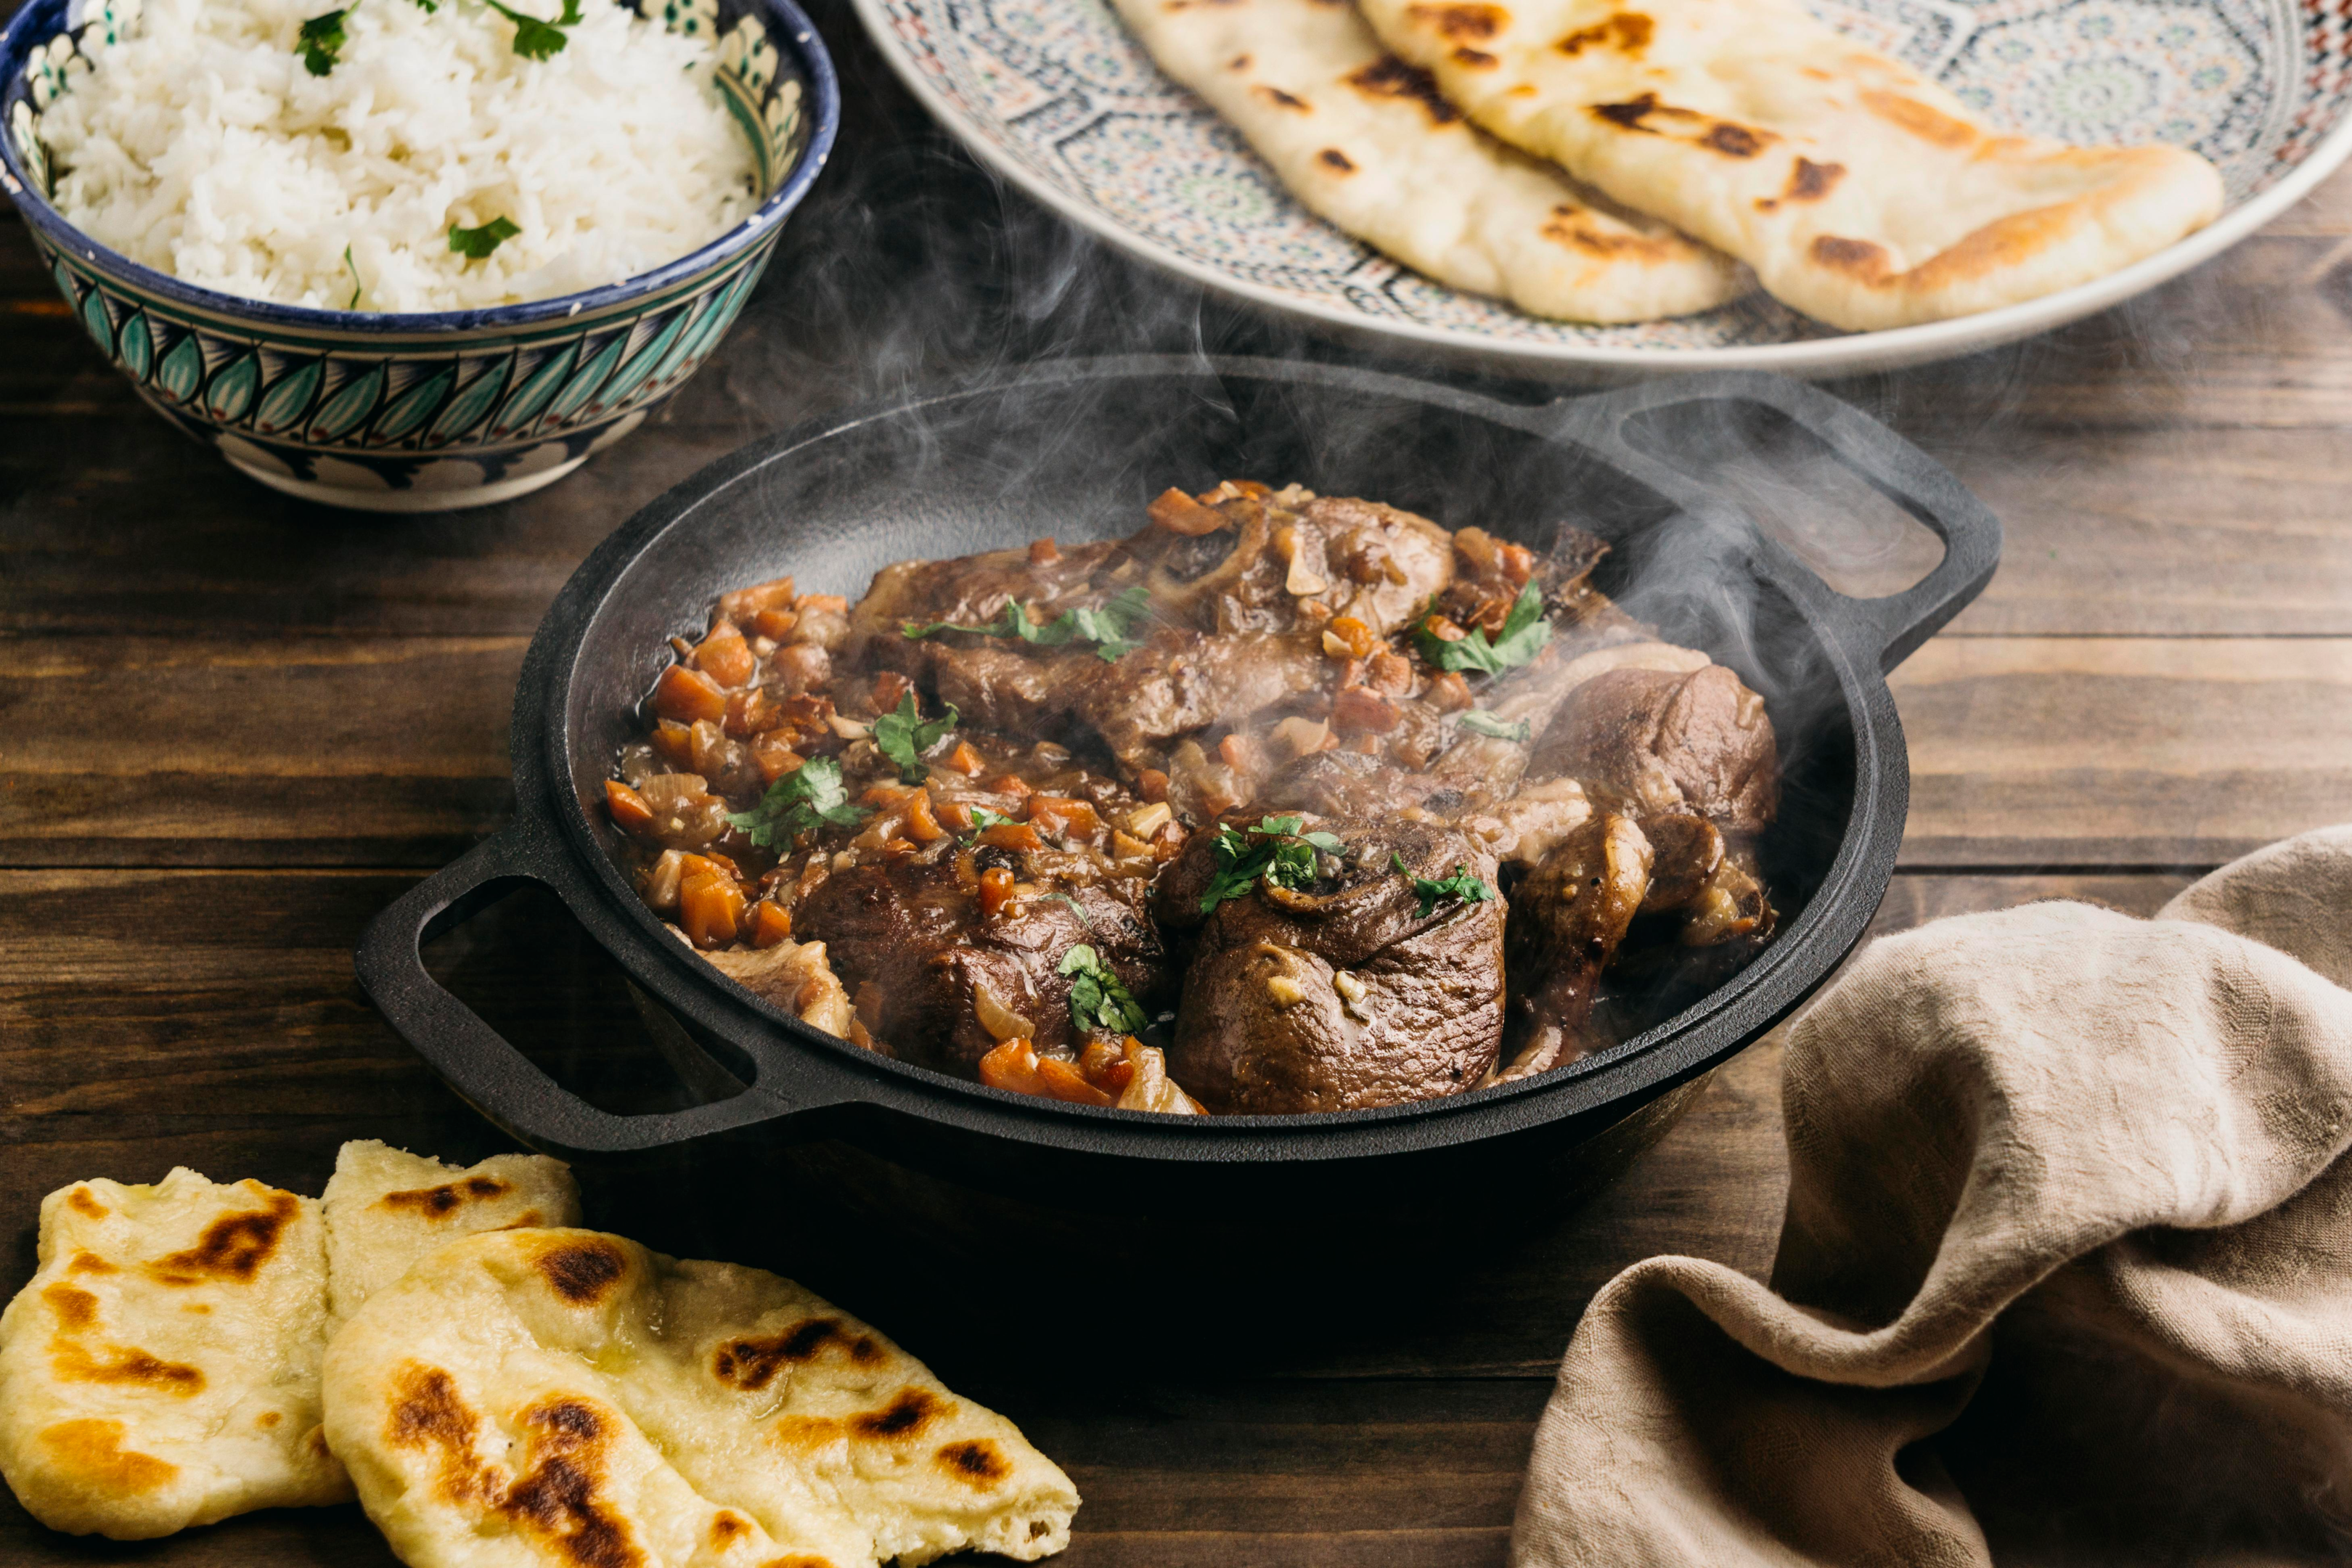 A lamb curry can be beautifully adapted to various regions around the world by adding regional flavours and ingredients.